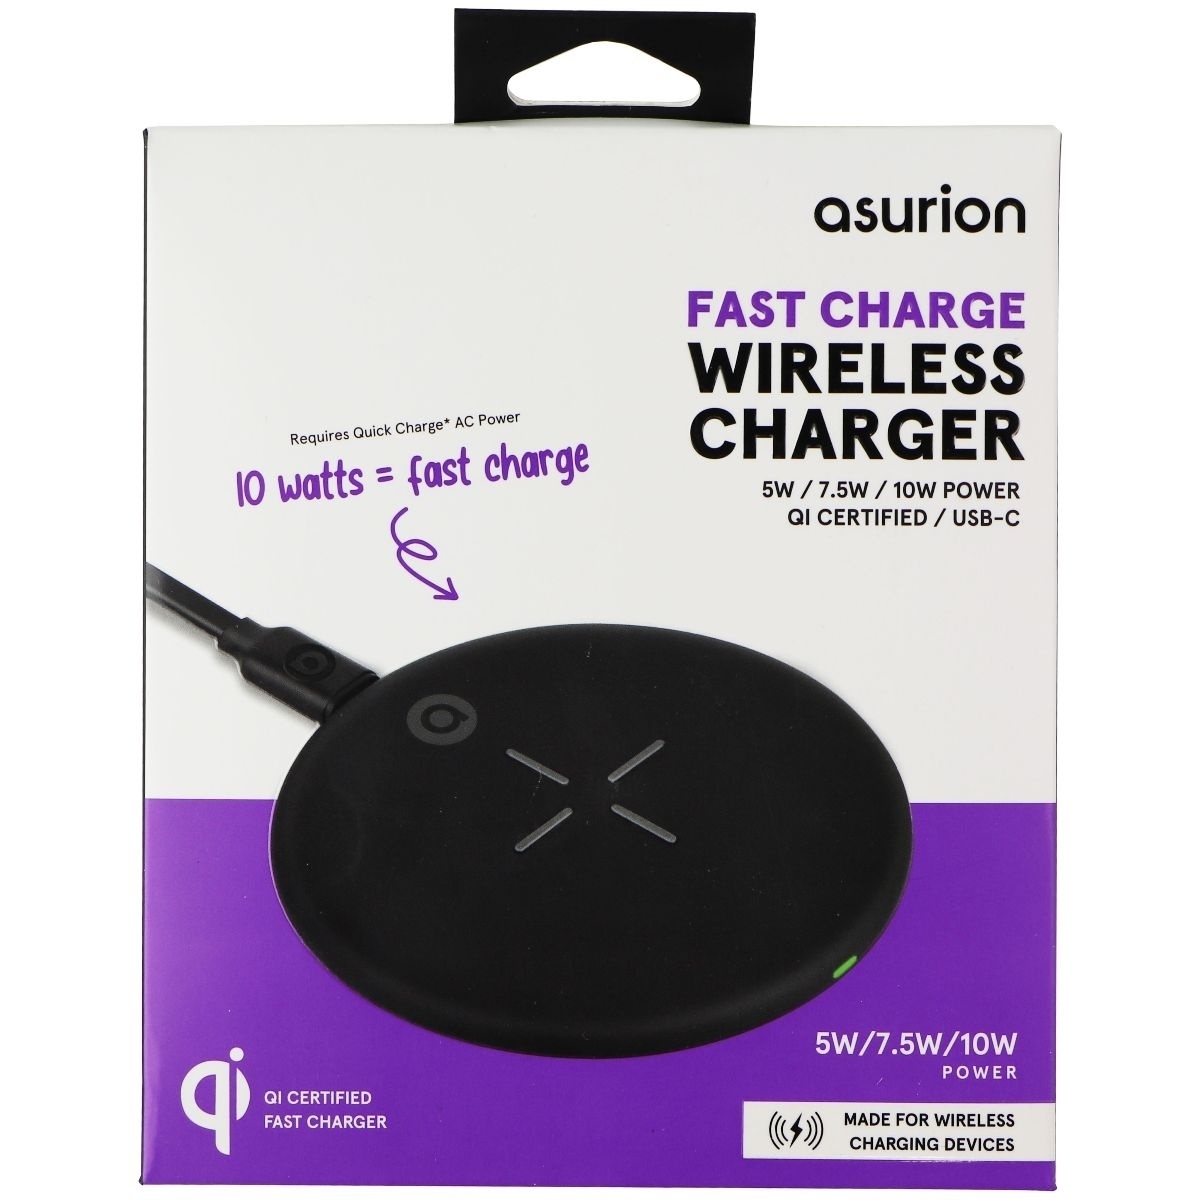 Asurion 10W Qi Certified Fast Charge Wireless Charger - Black (383197)